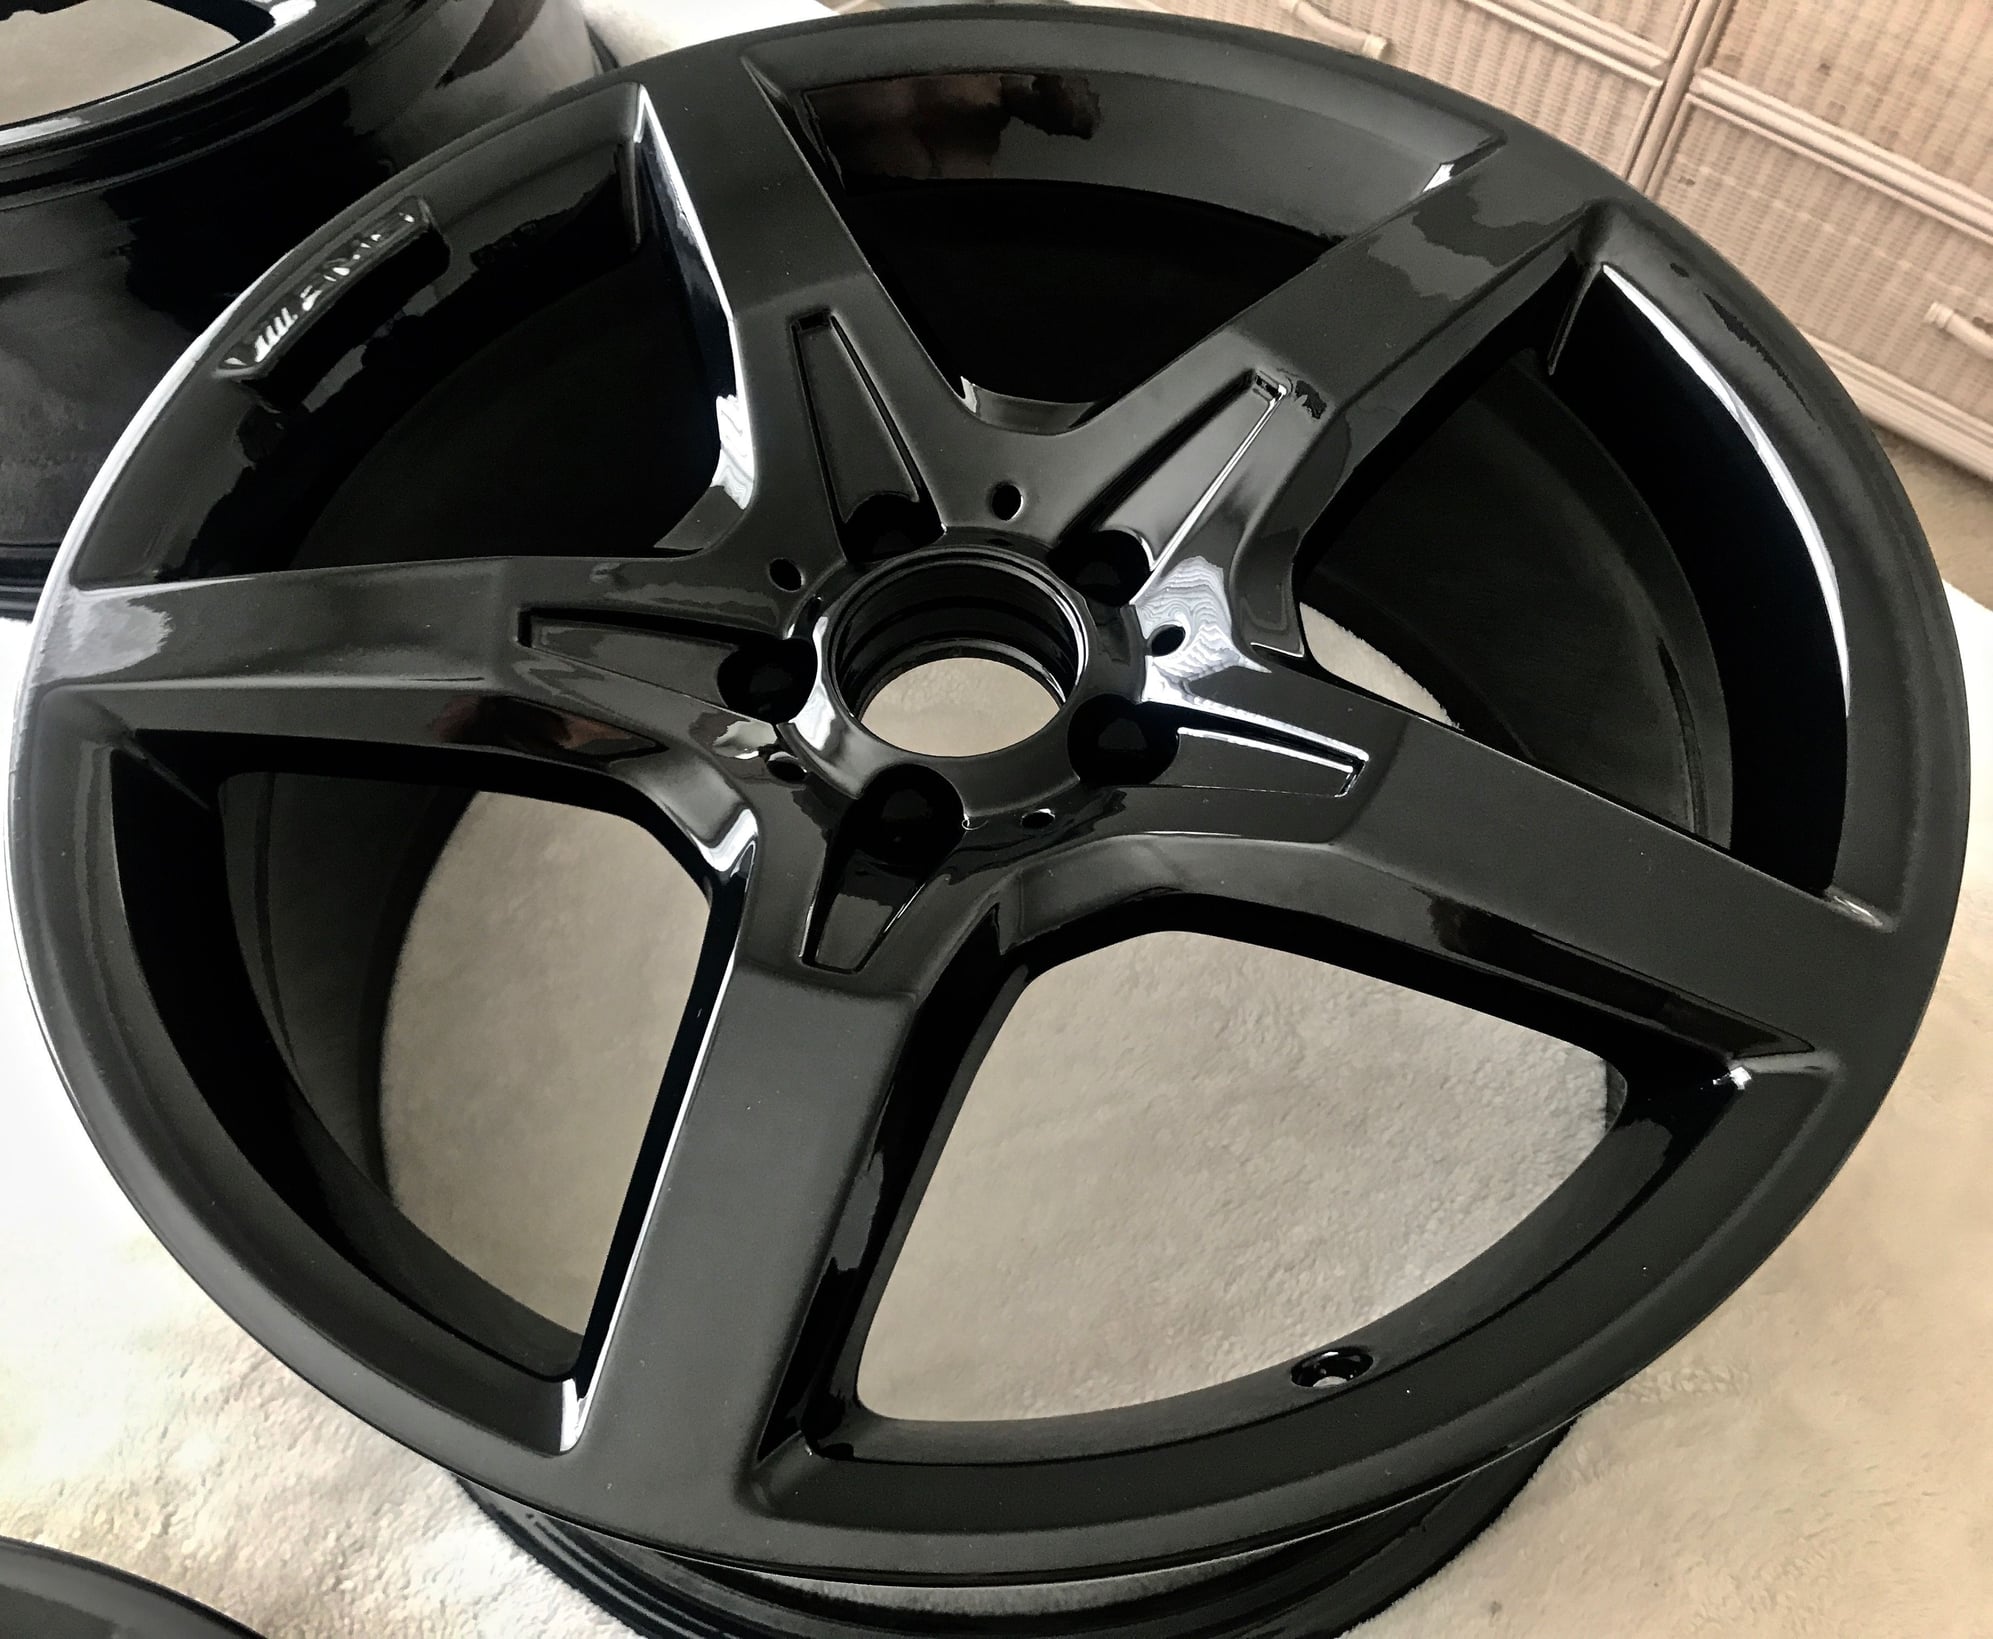 Wheels and Tires/Axles - AMG  19" Gloss Black Wheels  off a 2013 SL550 - Used - Westbury, NY 11590, United States